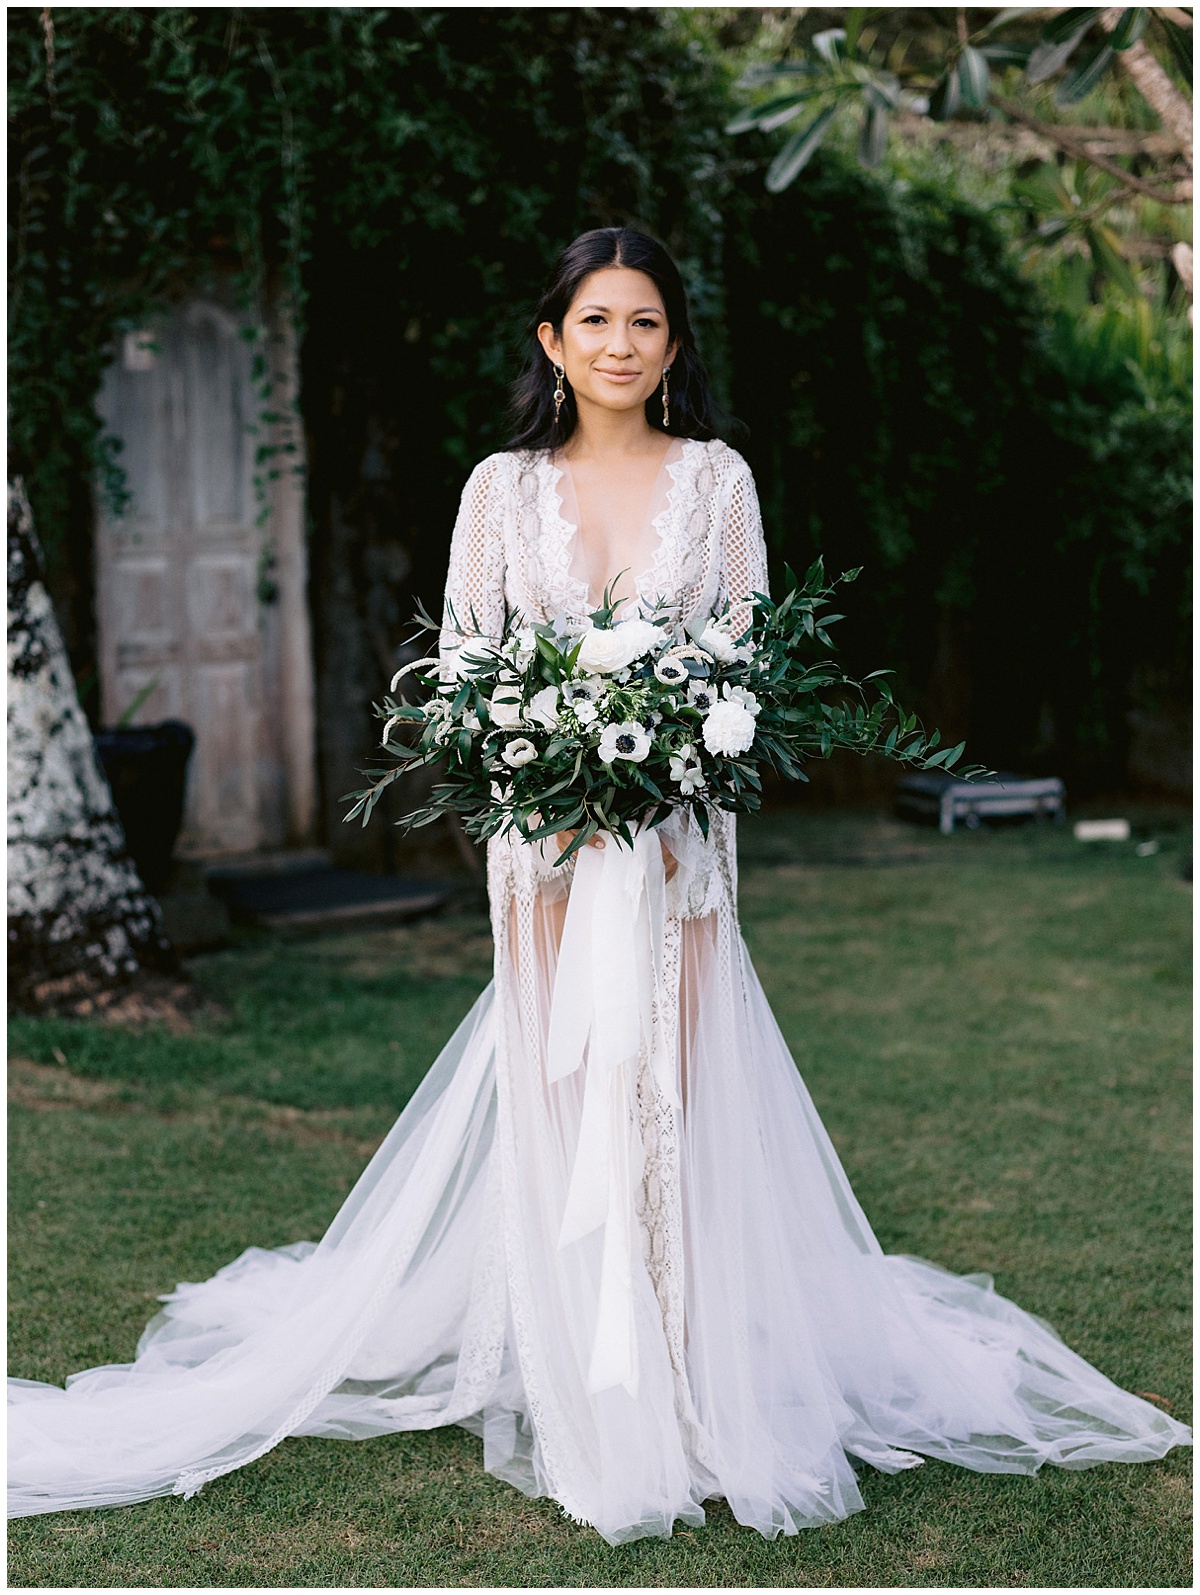 Bride holding a large bouquet of mixed white flowers and wearing a lacey, sheer gown that shows her legs from mid-thigh with a beautiful green space behind her. Editorial images taken by Jenny Fu